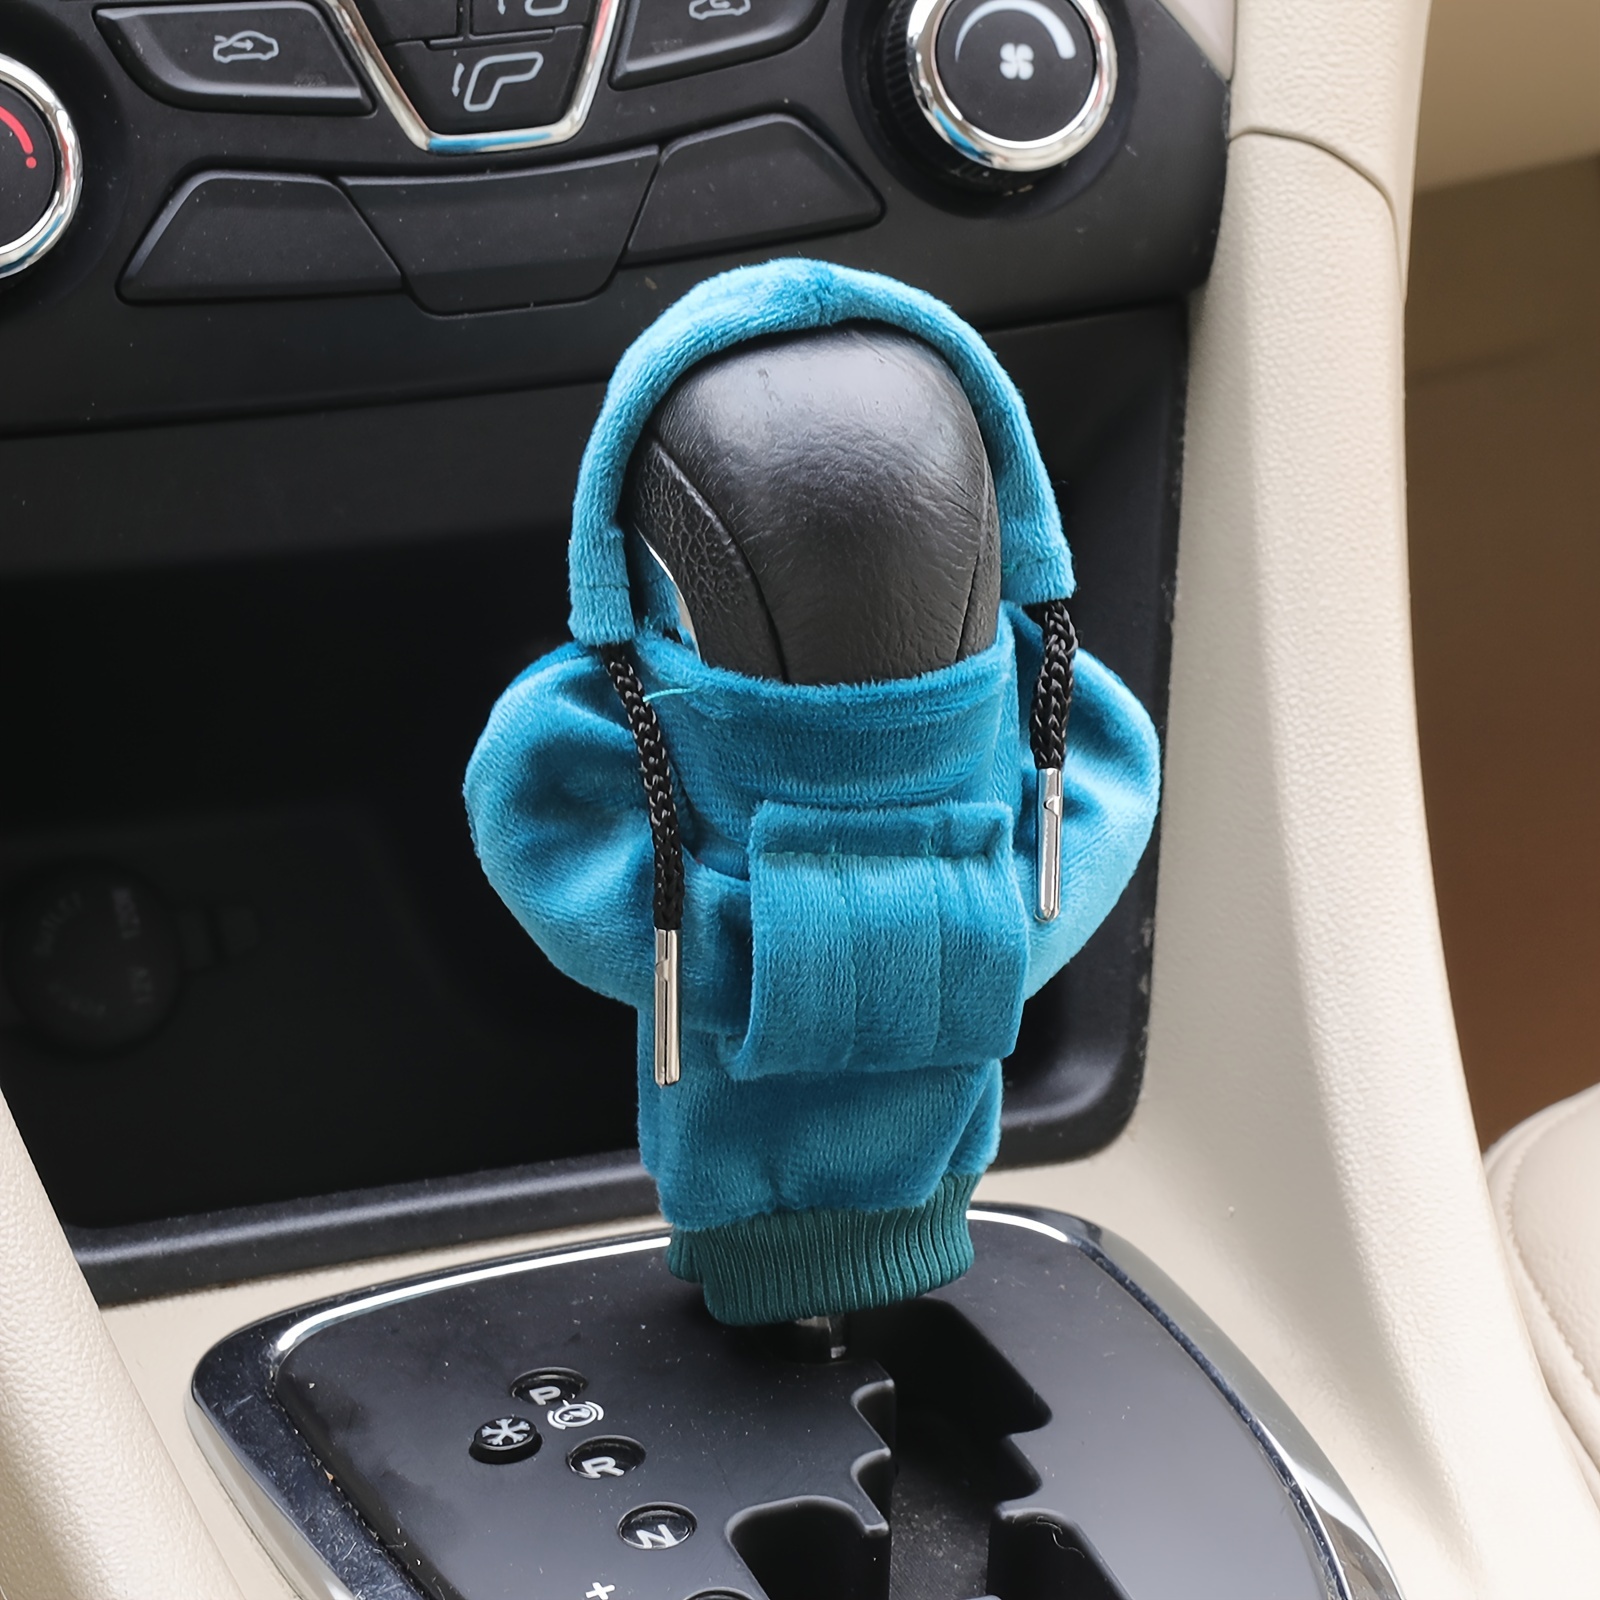 Salior Car Gear Shift Cover,Vivid Gear Shift Knob Hoodie for Car  Decorations & Protections,Universal Car Interior Accessories Stick Shift  Cover Fits